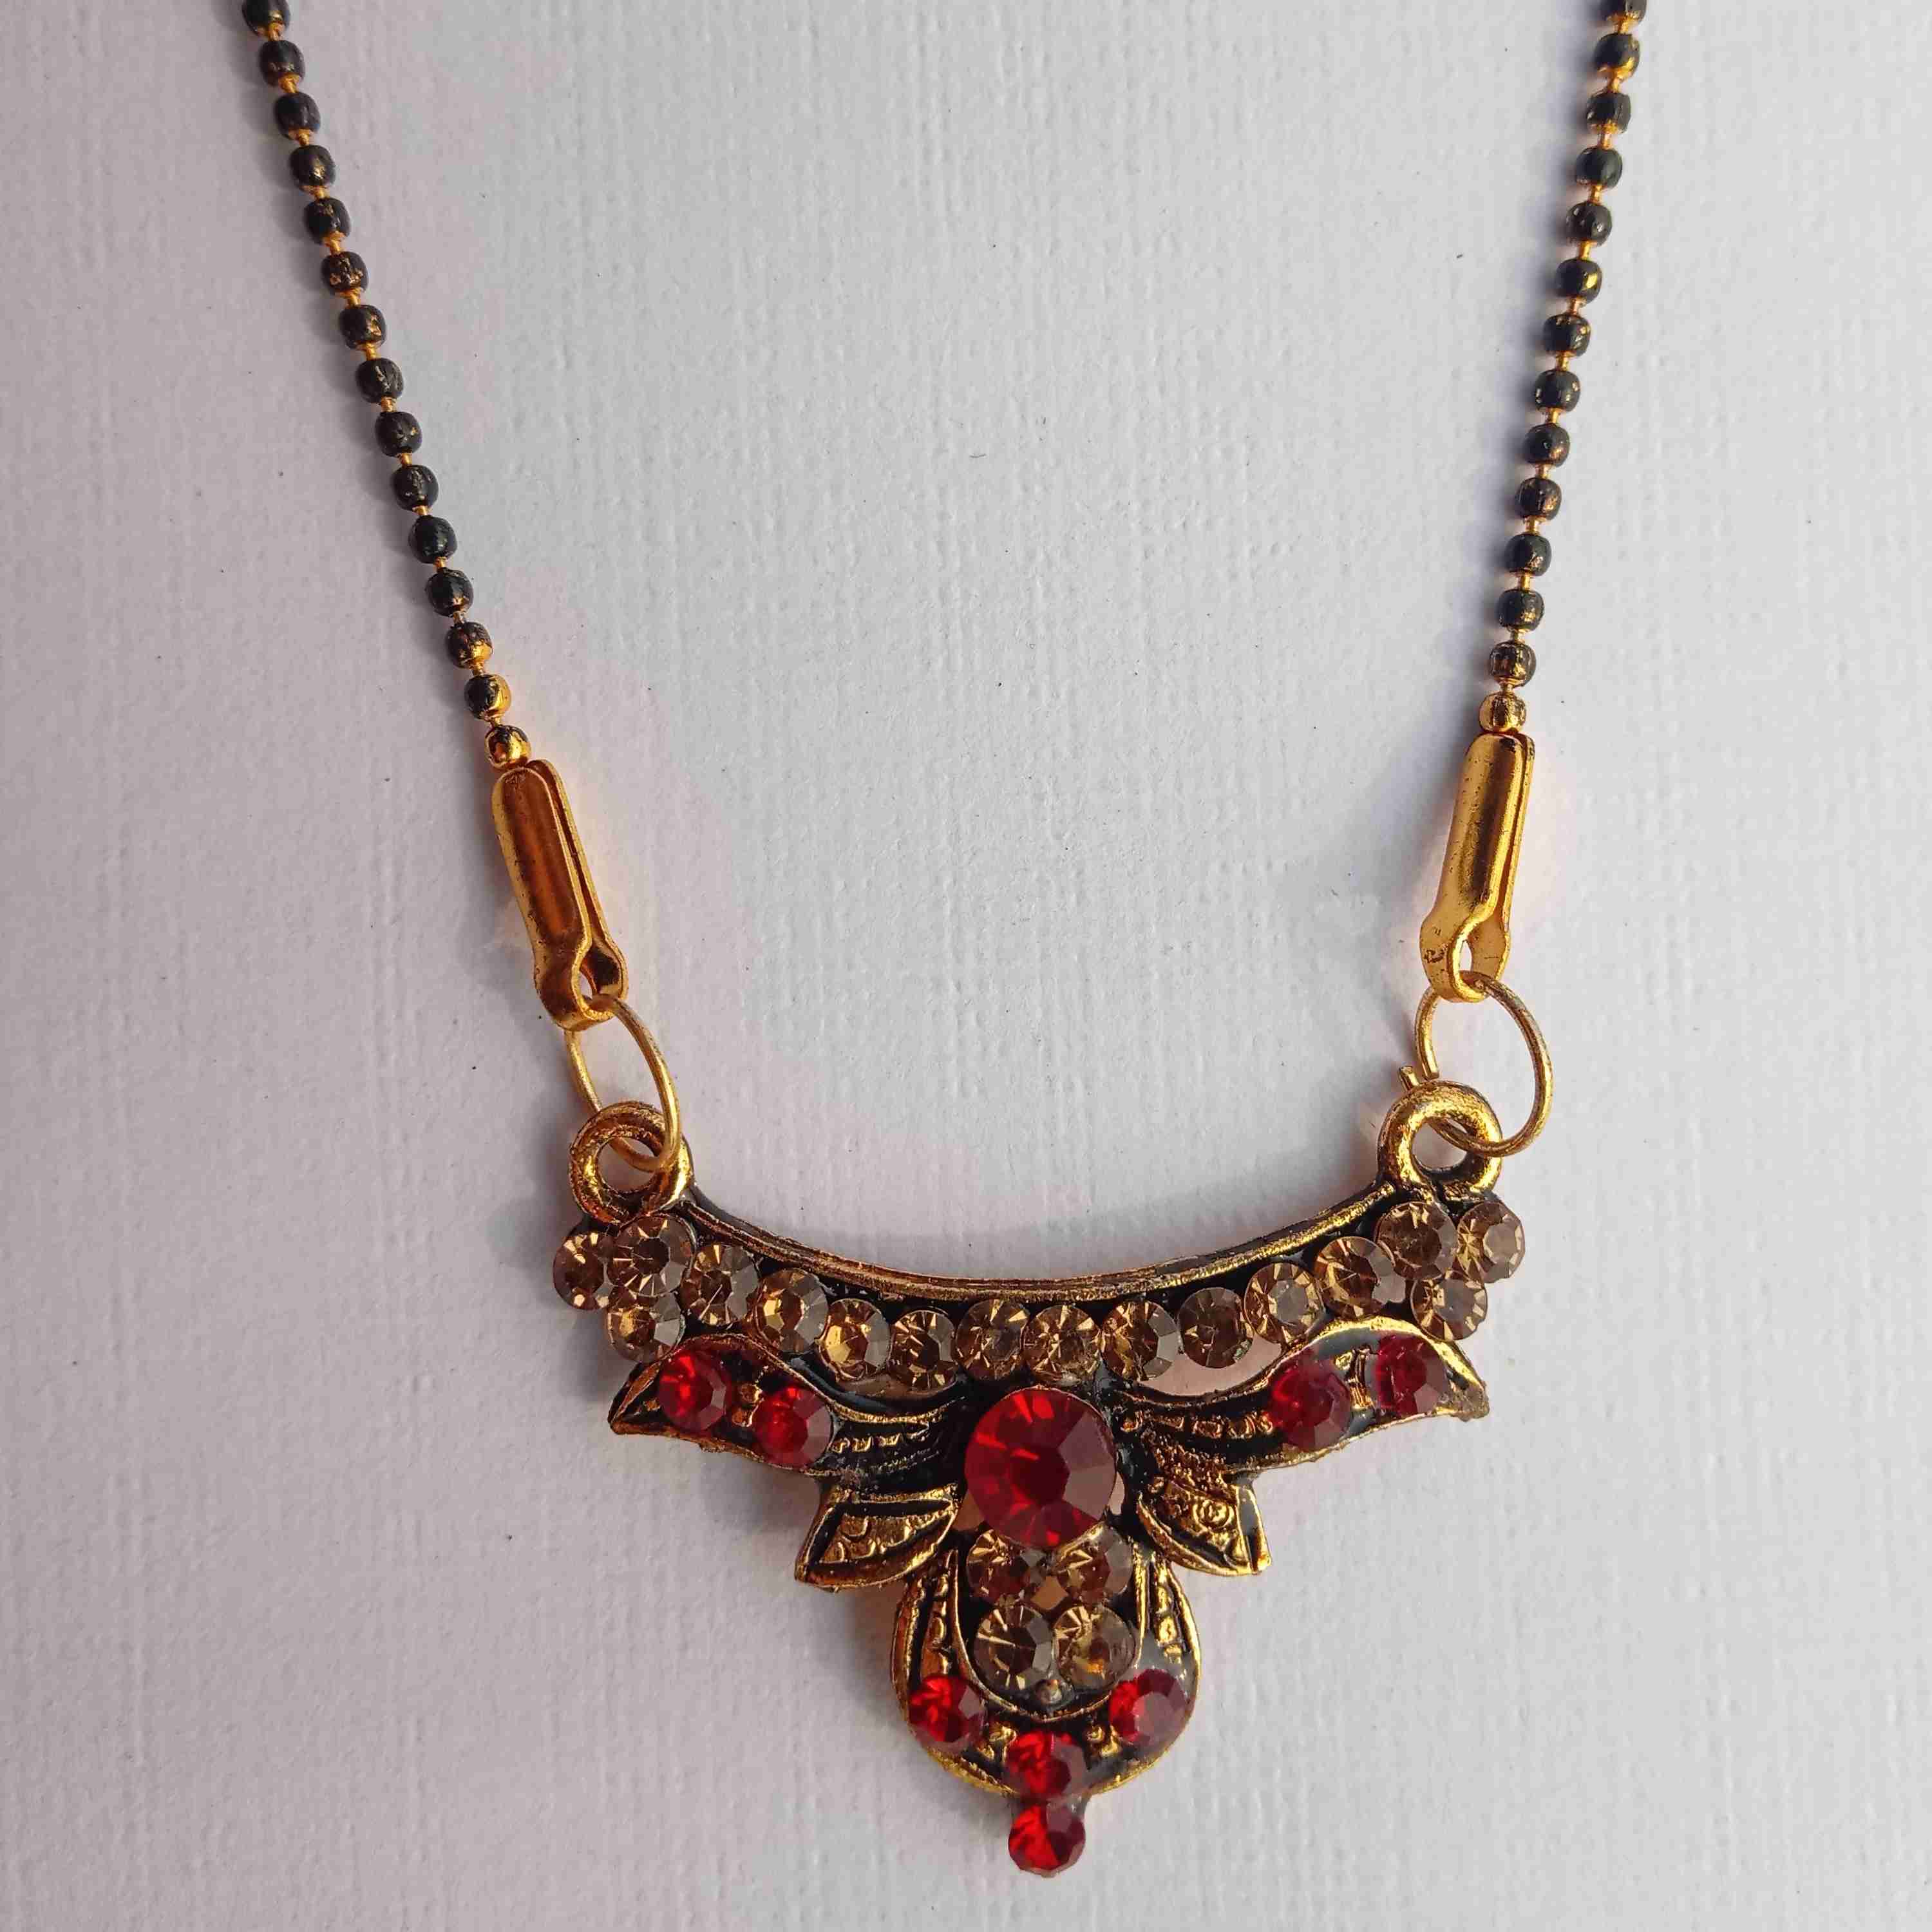 Oxidised Gold Plated Mangalsutra With Black/Gold Mix Bead